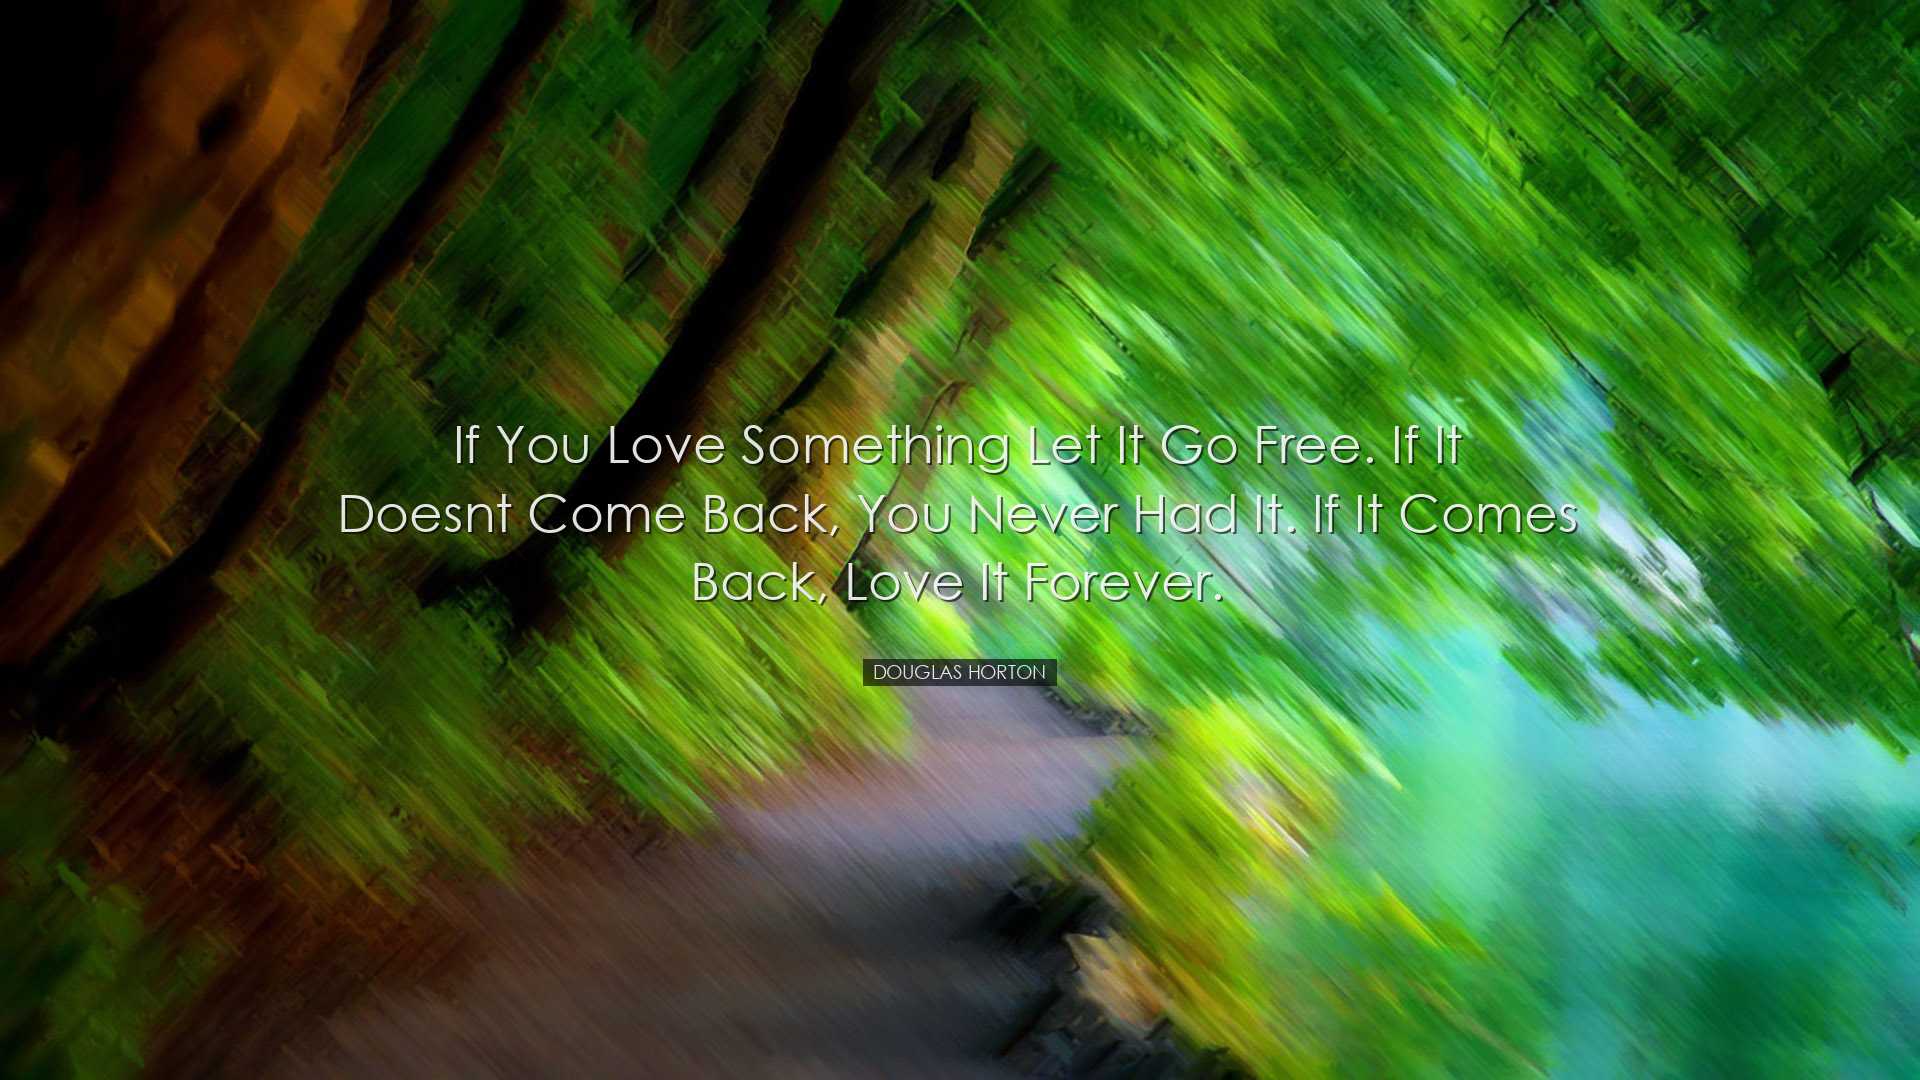 If you love something let it go free. If it doesnt come back, you